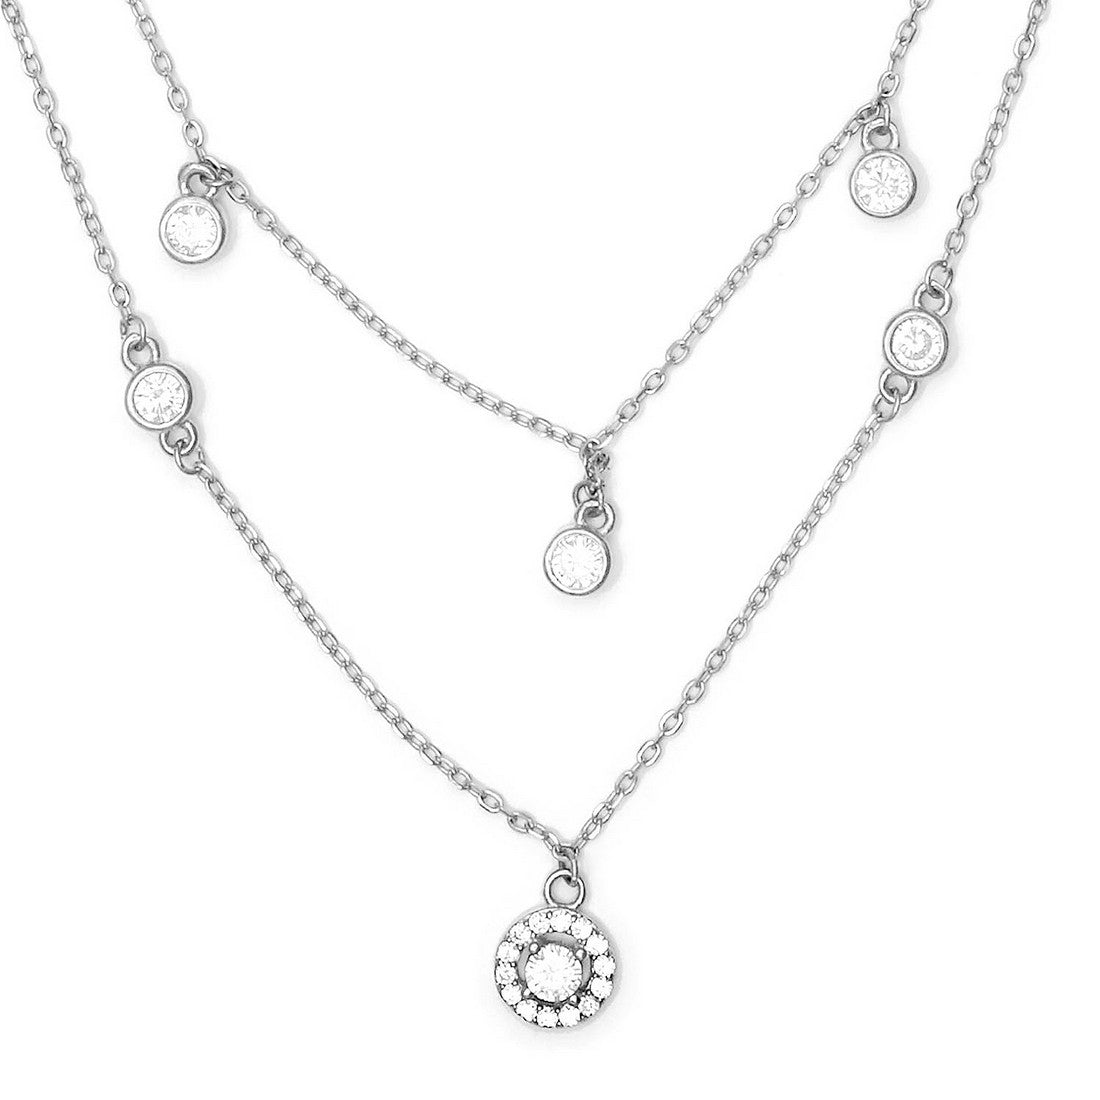 Stunning Silver Layered 925 Silver Necklace